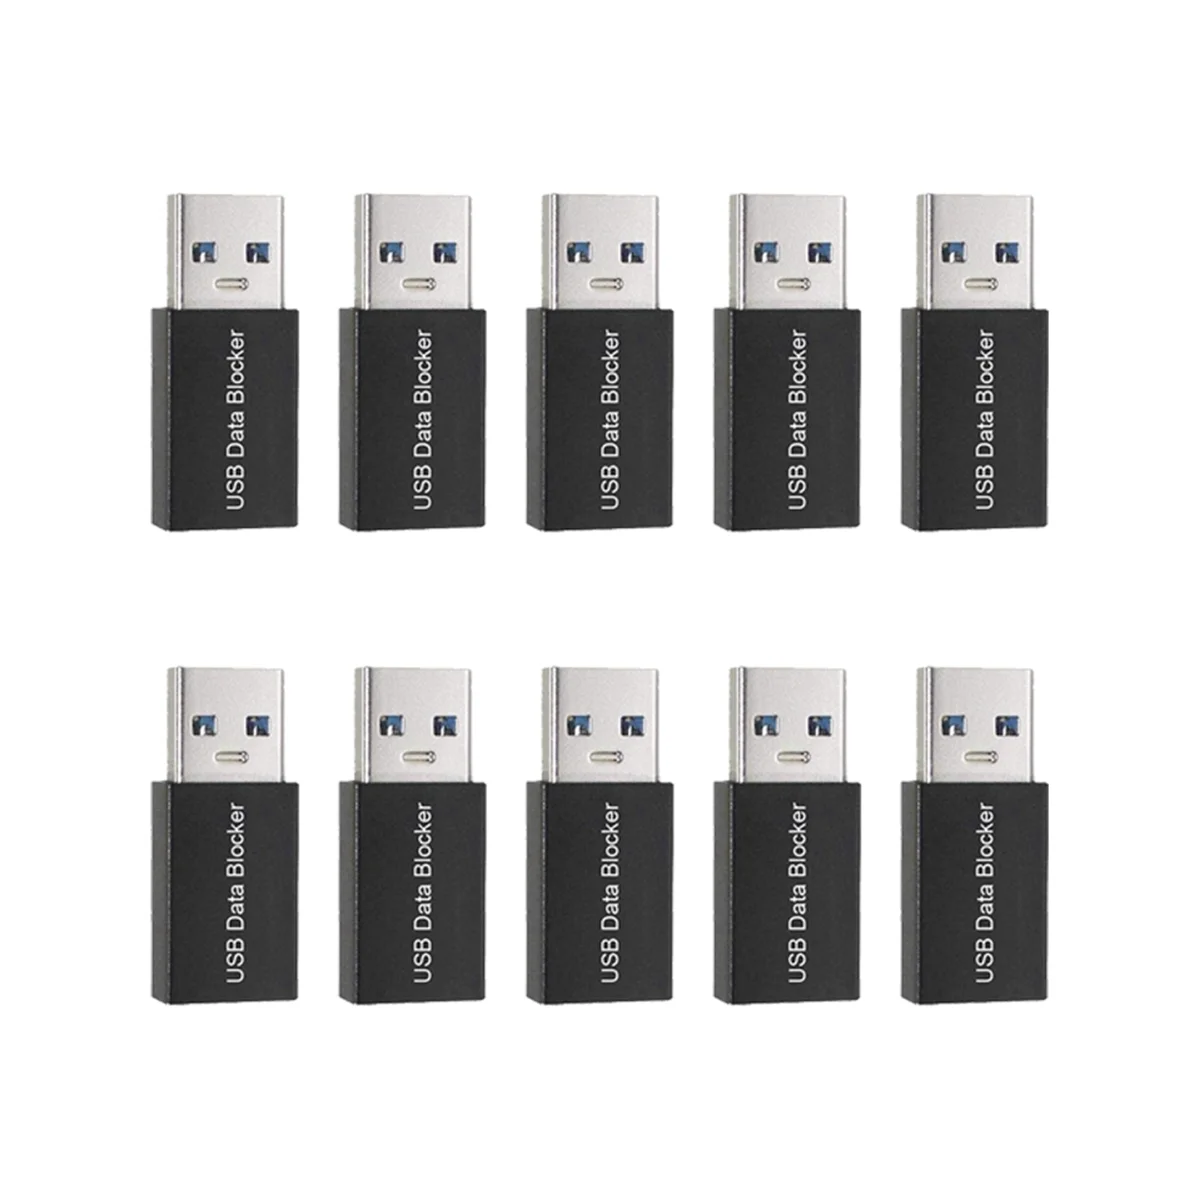 

10Pcs USB Blockers Data Sync Blockers USB Connector Against Jacking Adapters for Blocking Data Sync